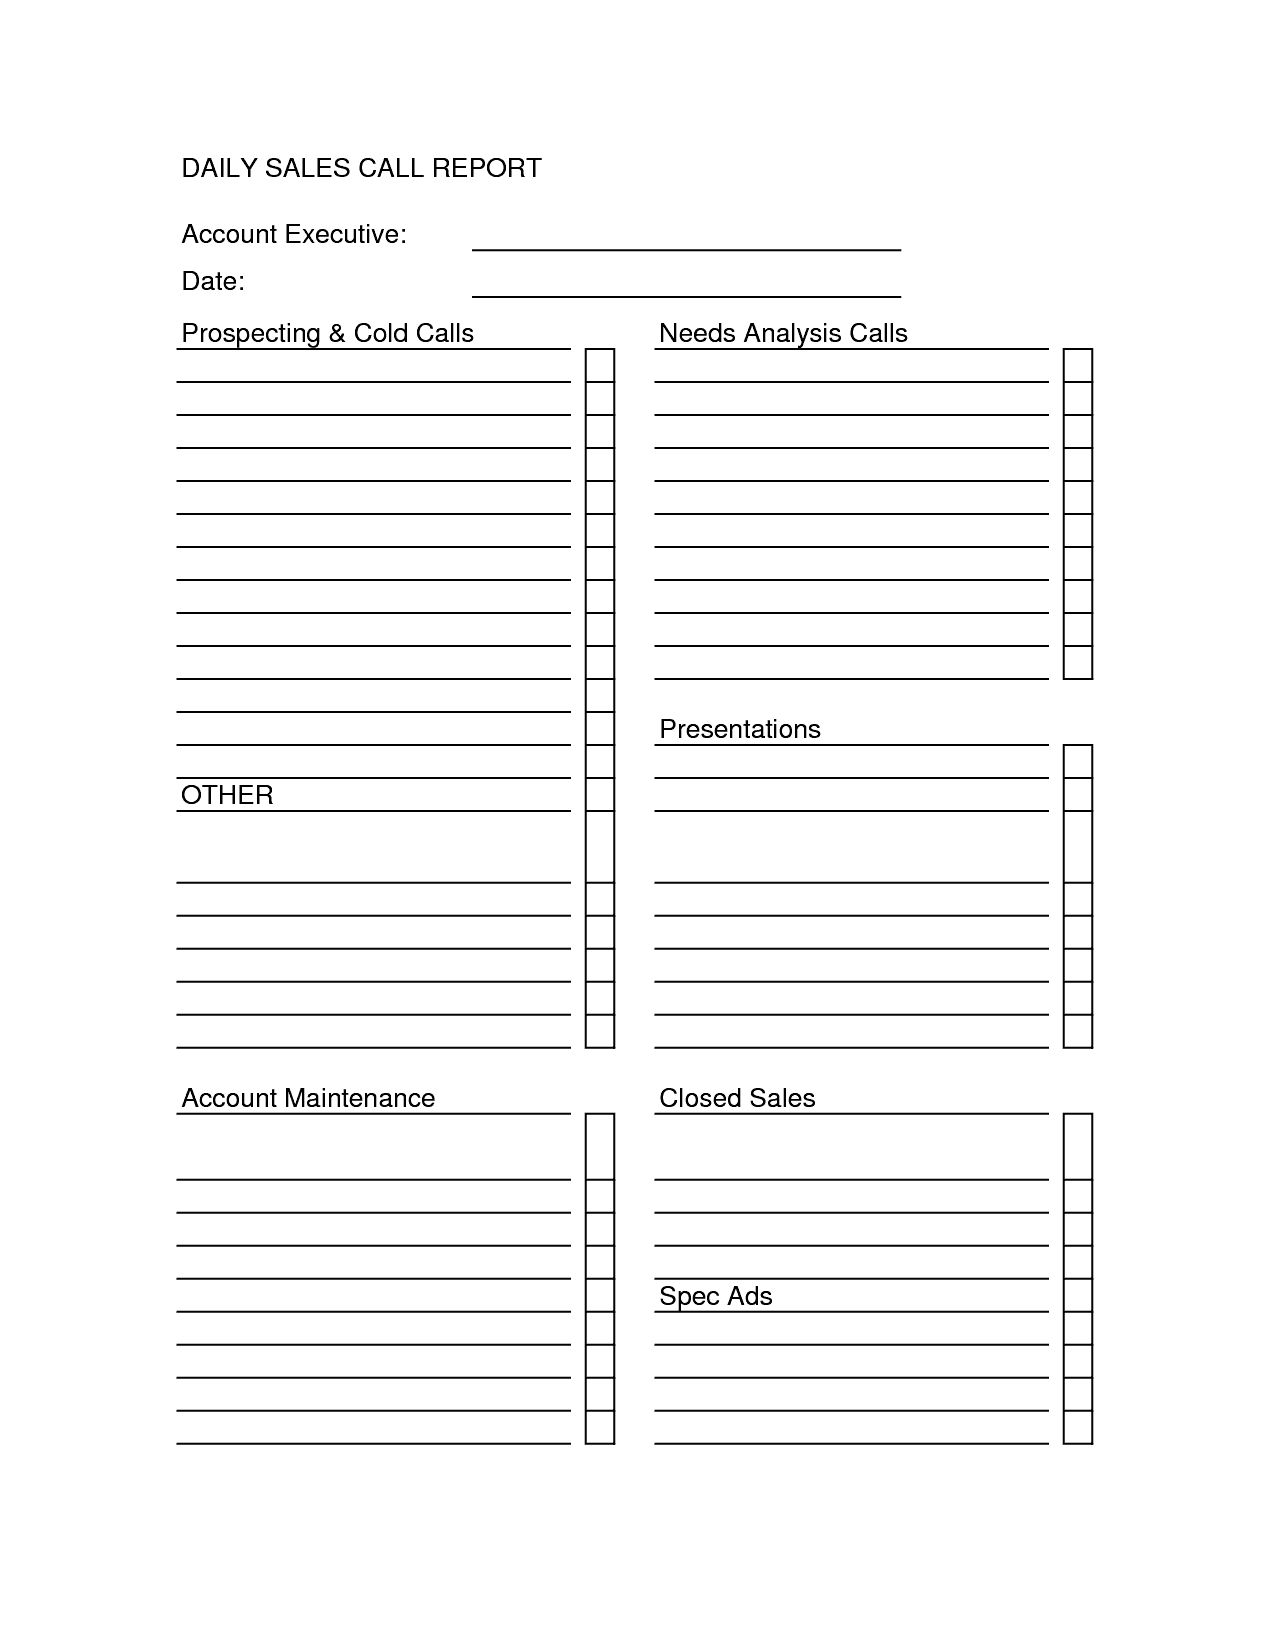 Sales Call Report Templates – Word Excel Fomats Inside Daily Sales Call Report Template Free Download